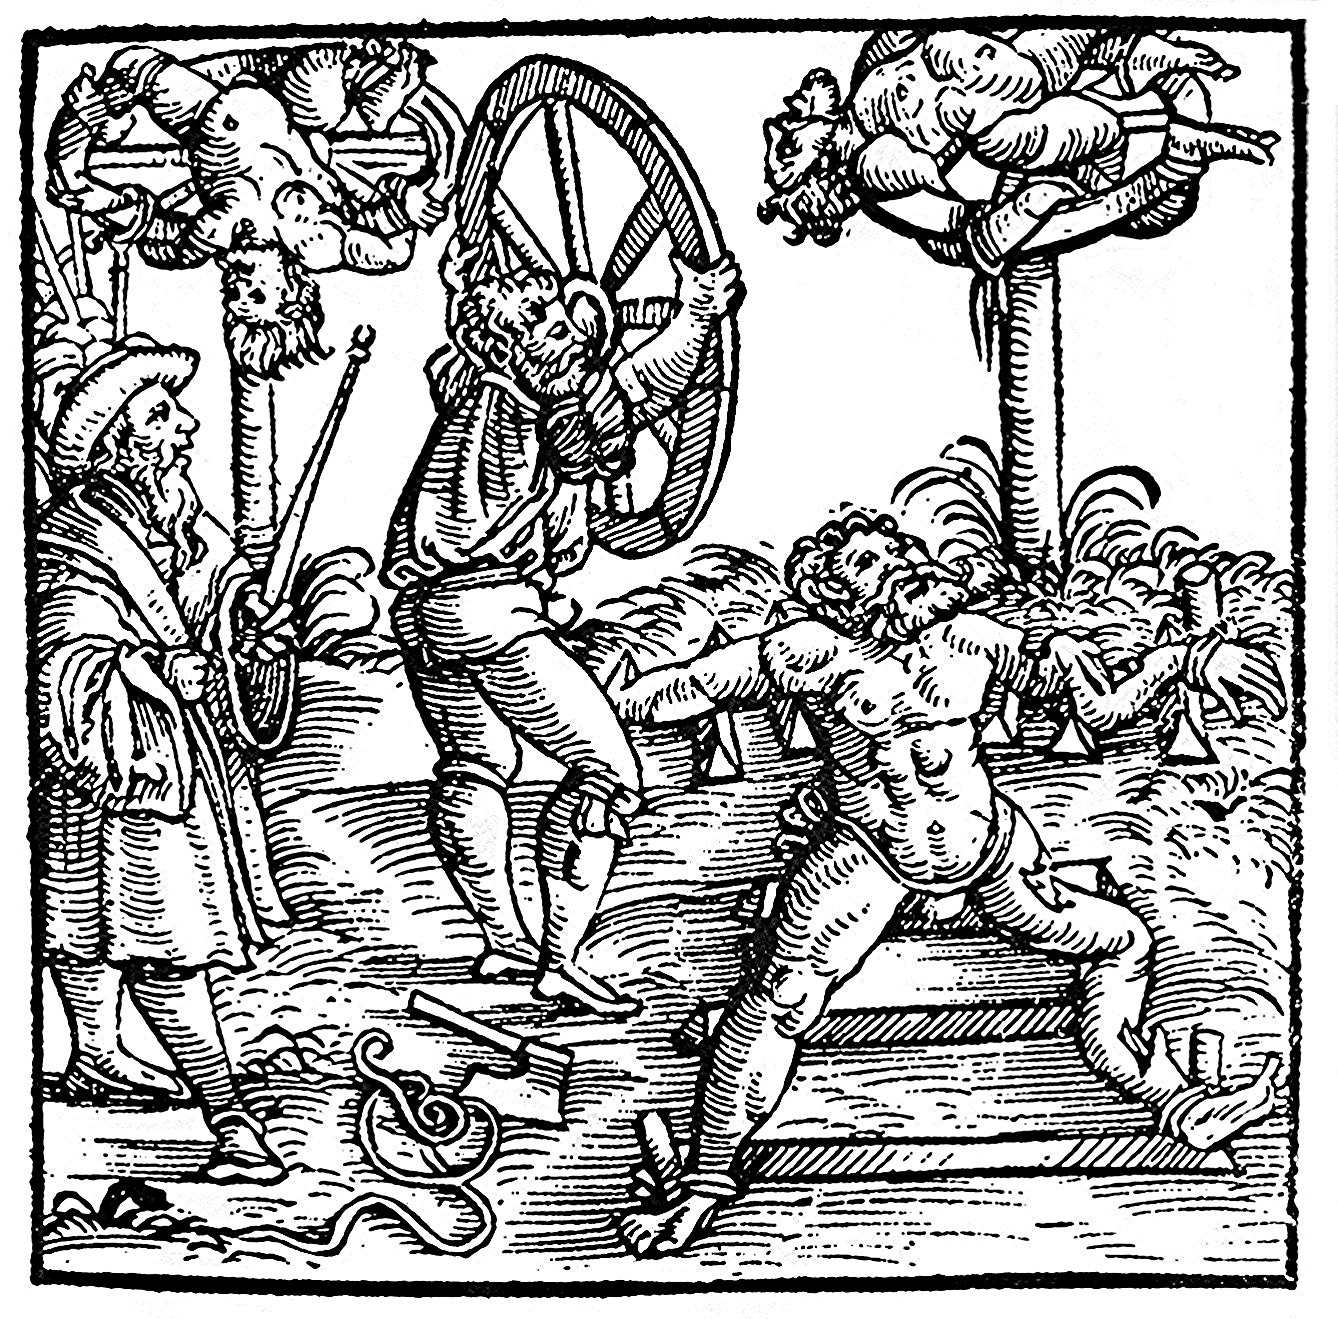 Bavarian illustration of execution by wheel from 1586, via Wikipedia: A prisoner is having his limbs broken with a wheel in the foreground, “with wheel crucifixions in the background.” It looks unpleasant!